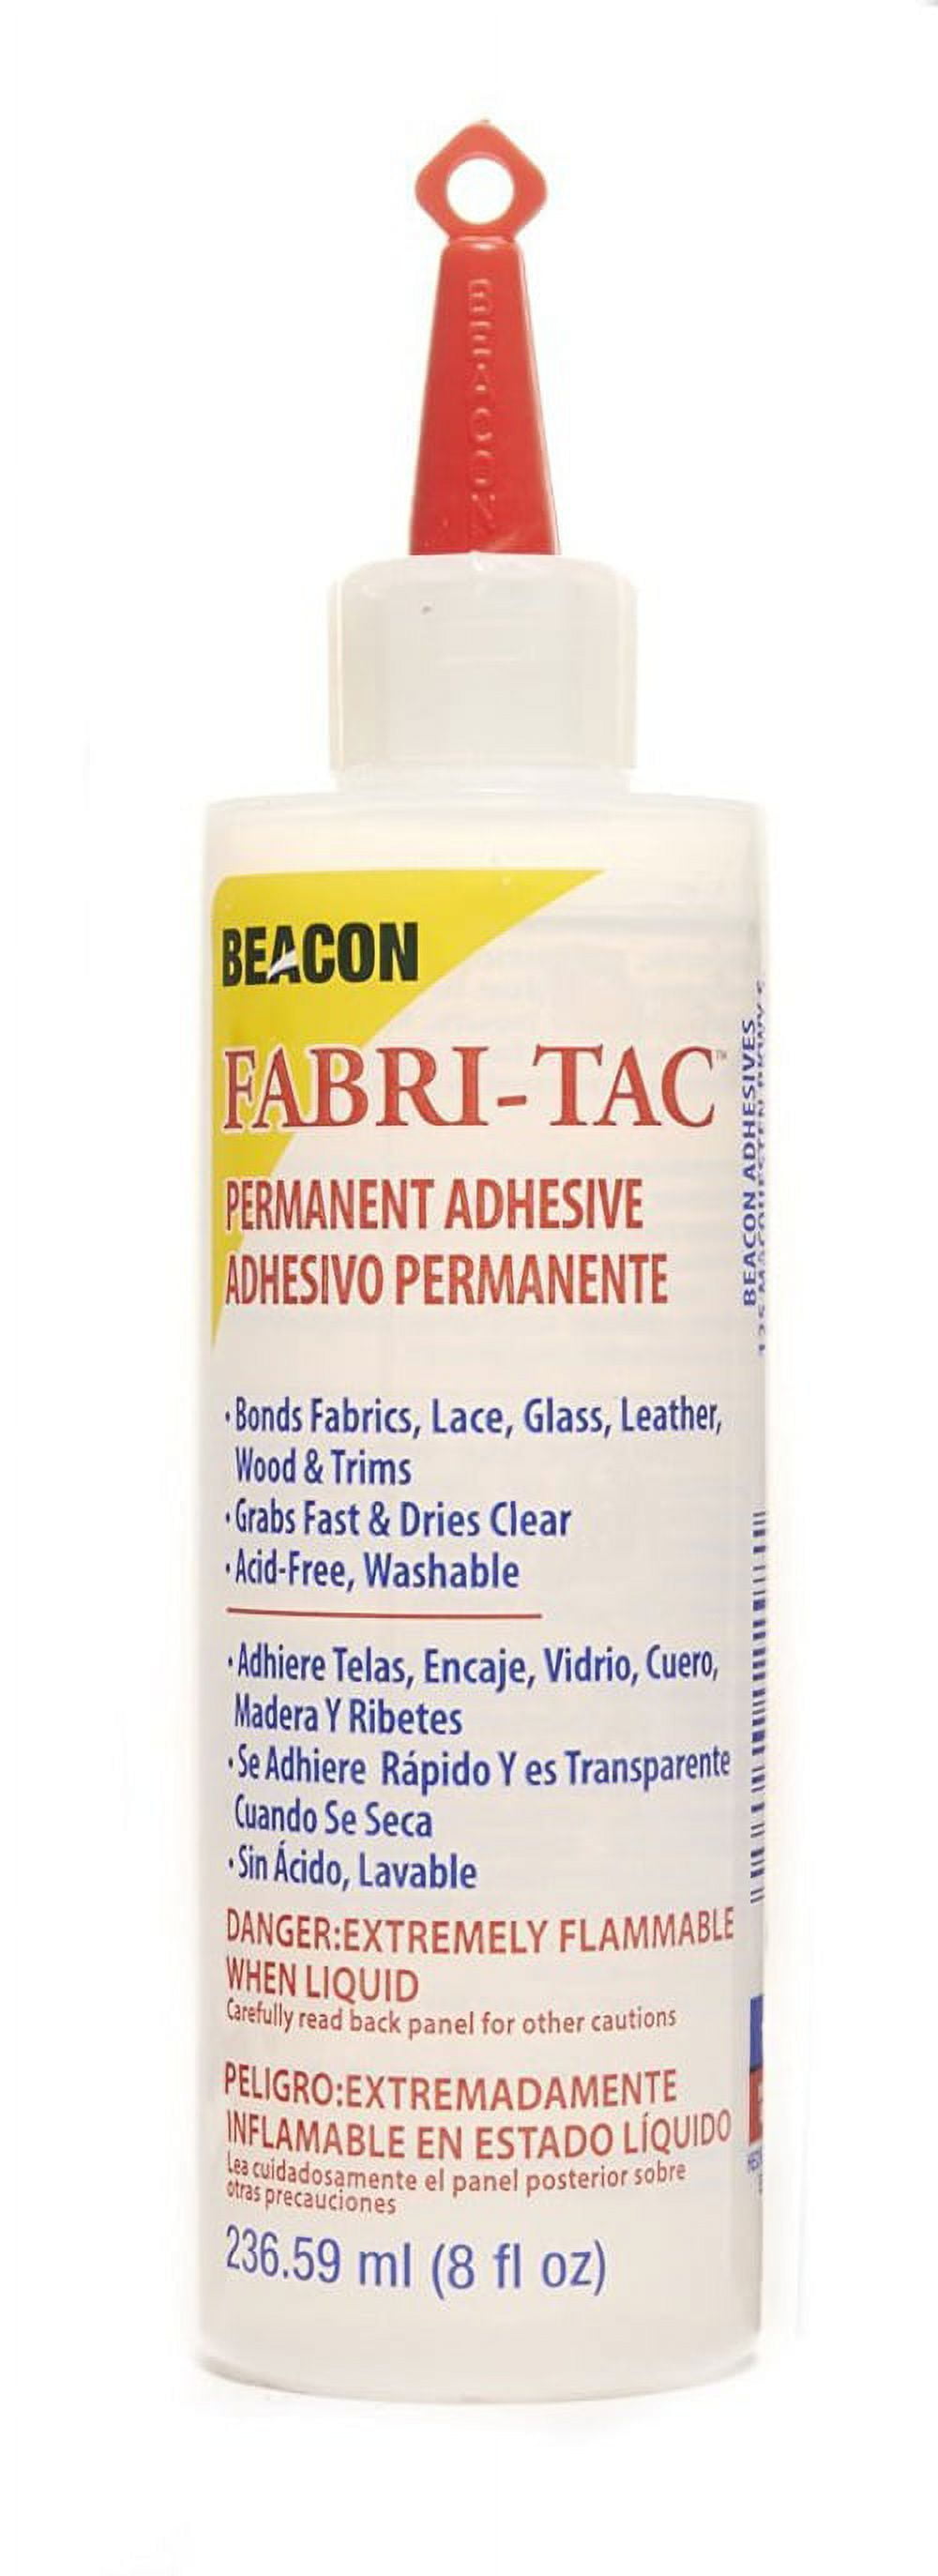 BEACON Fabri-Tac Premium Fabric Glue - Quick Drying, Crystal Clear,  Permanent - for Fabrics, Canvas, Lace, Wood and More, 8-Ounce